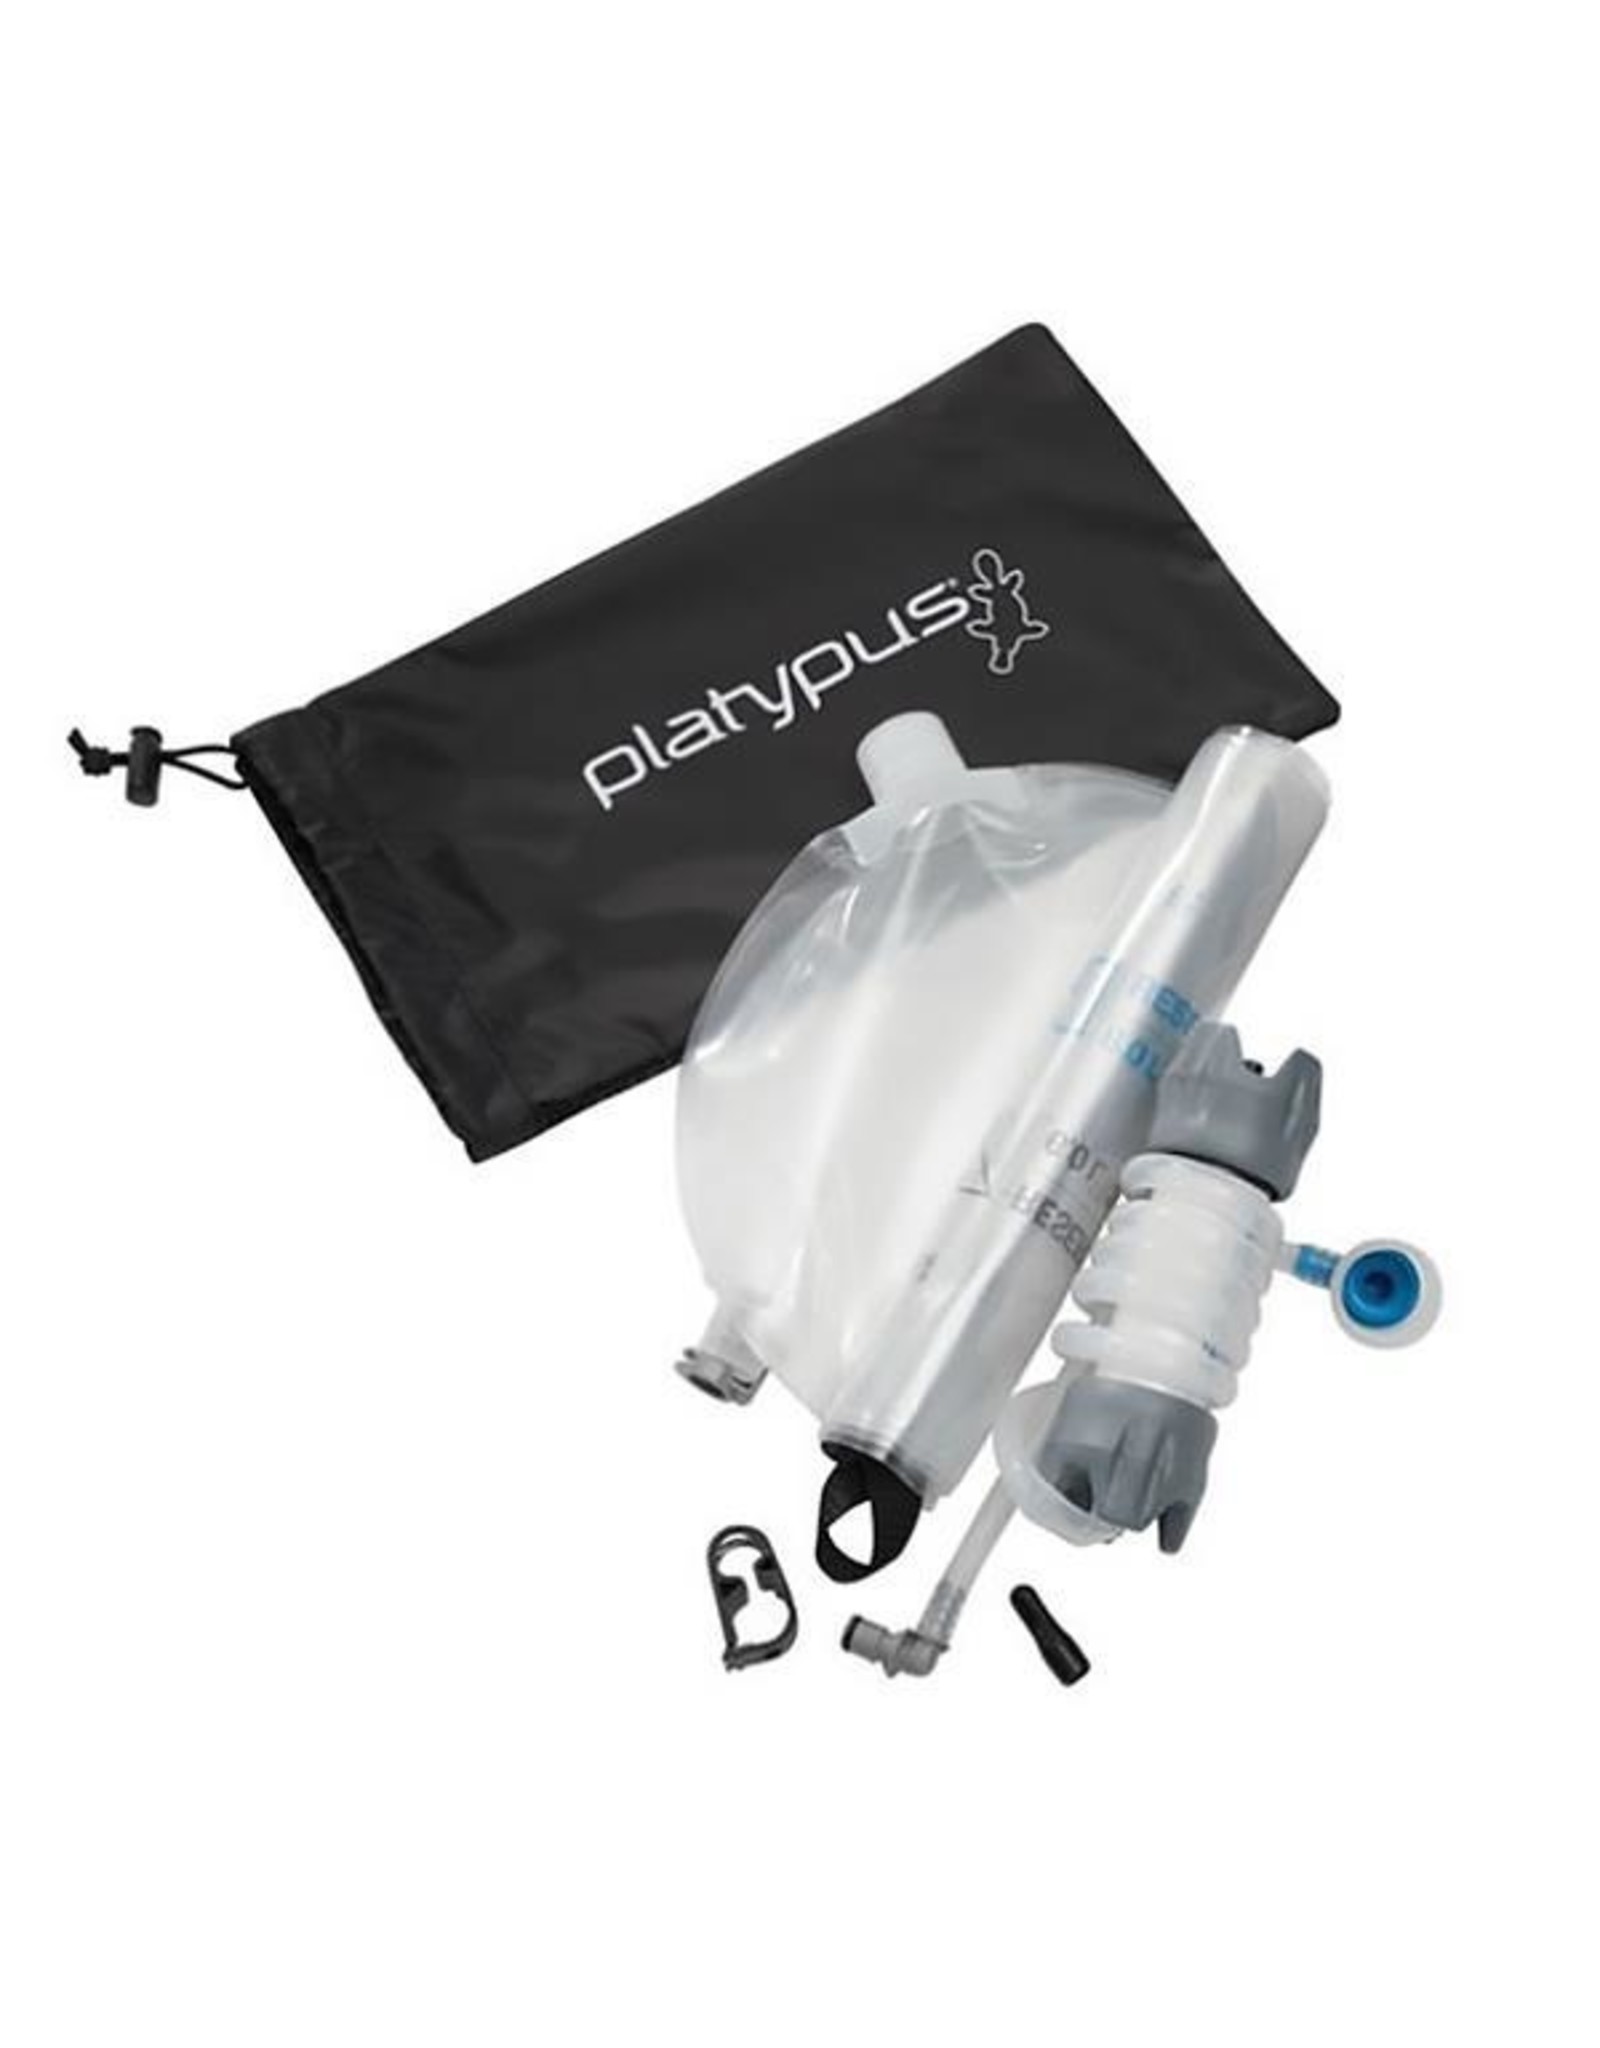 PLATYPUS GRAVITYWORKS WATER FILTER SYSTEM